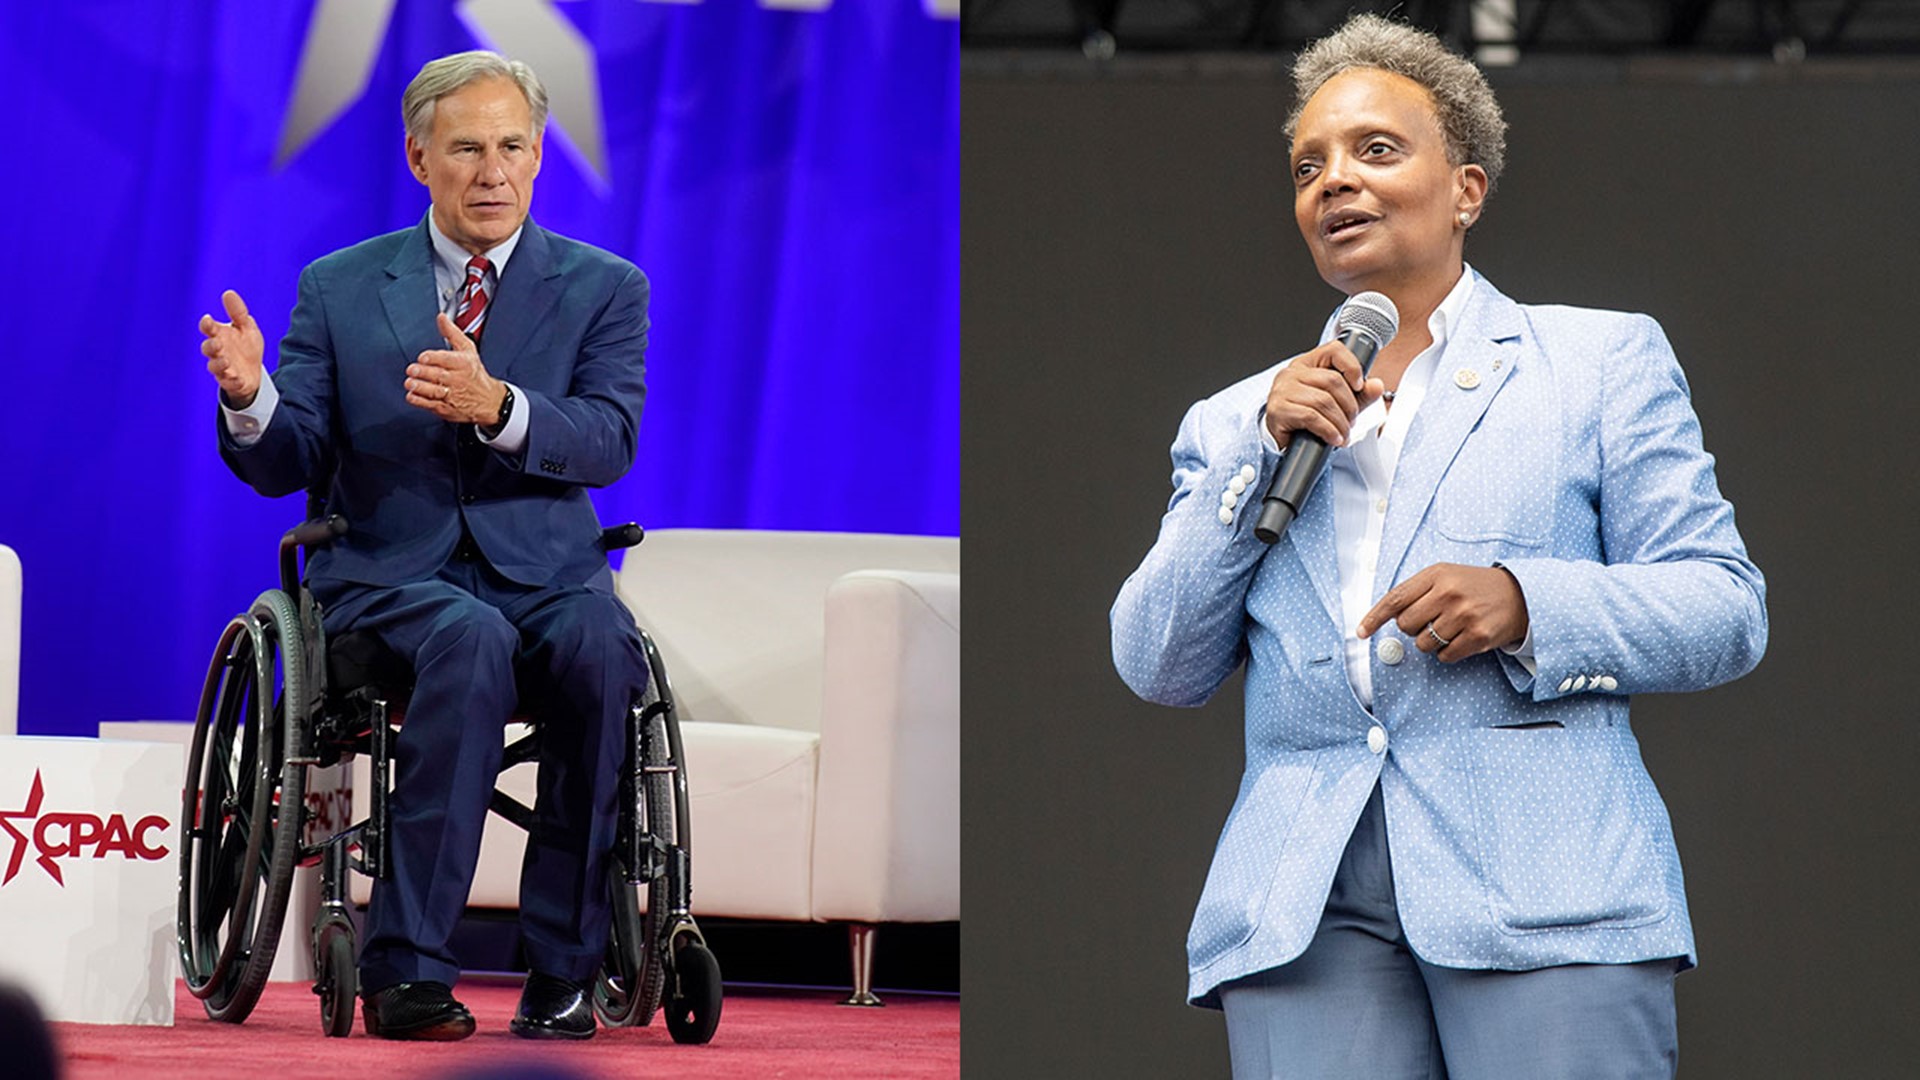 Chicago Mayor Lori Lightfoot issued a statement expressing frustration with Gov. Greg Abbott's plan to send migrants to sanctuary cities across the country.